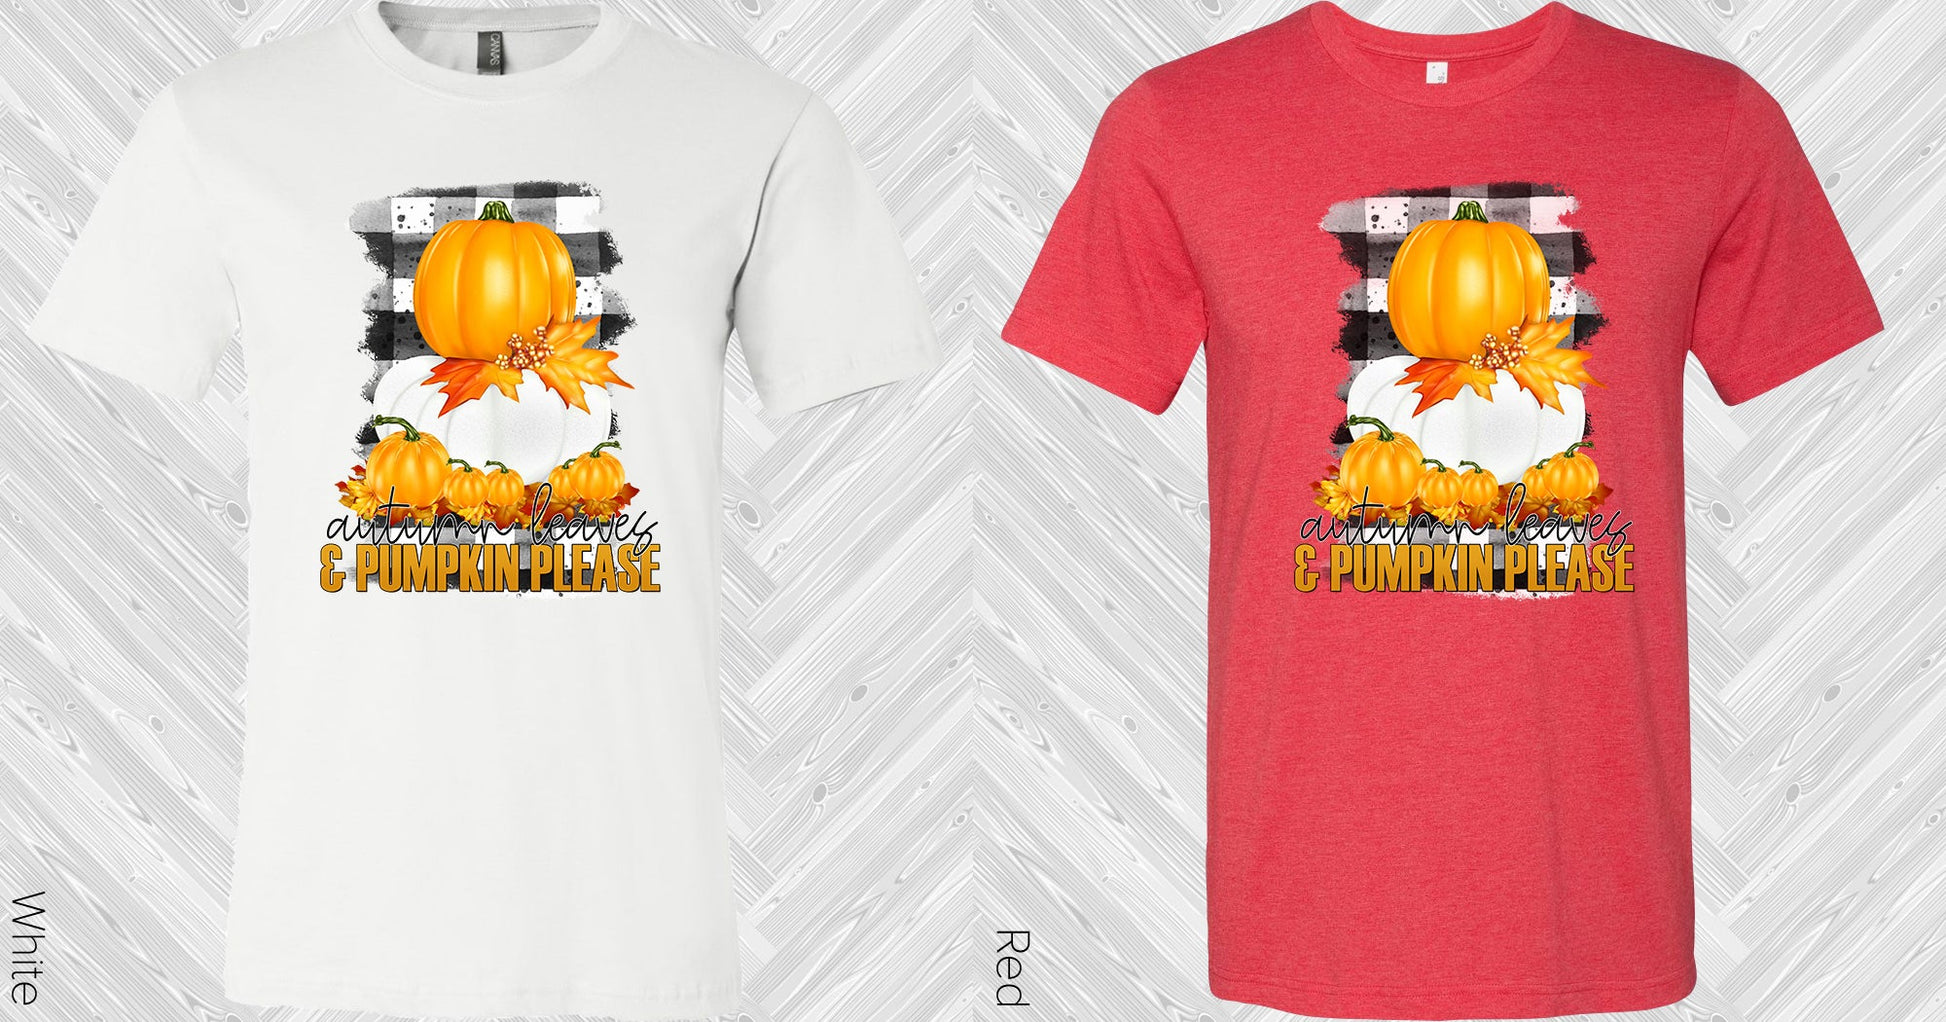 Autumn Leaves And Pumpkin Please Graphic Tee Graphic Tee